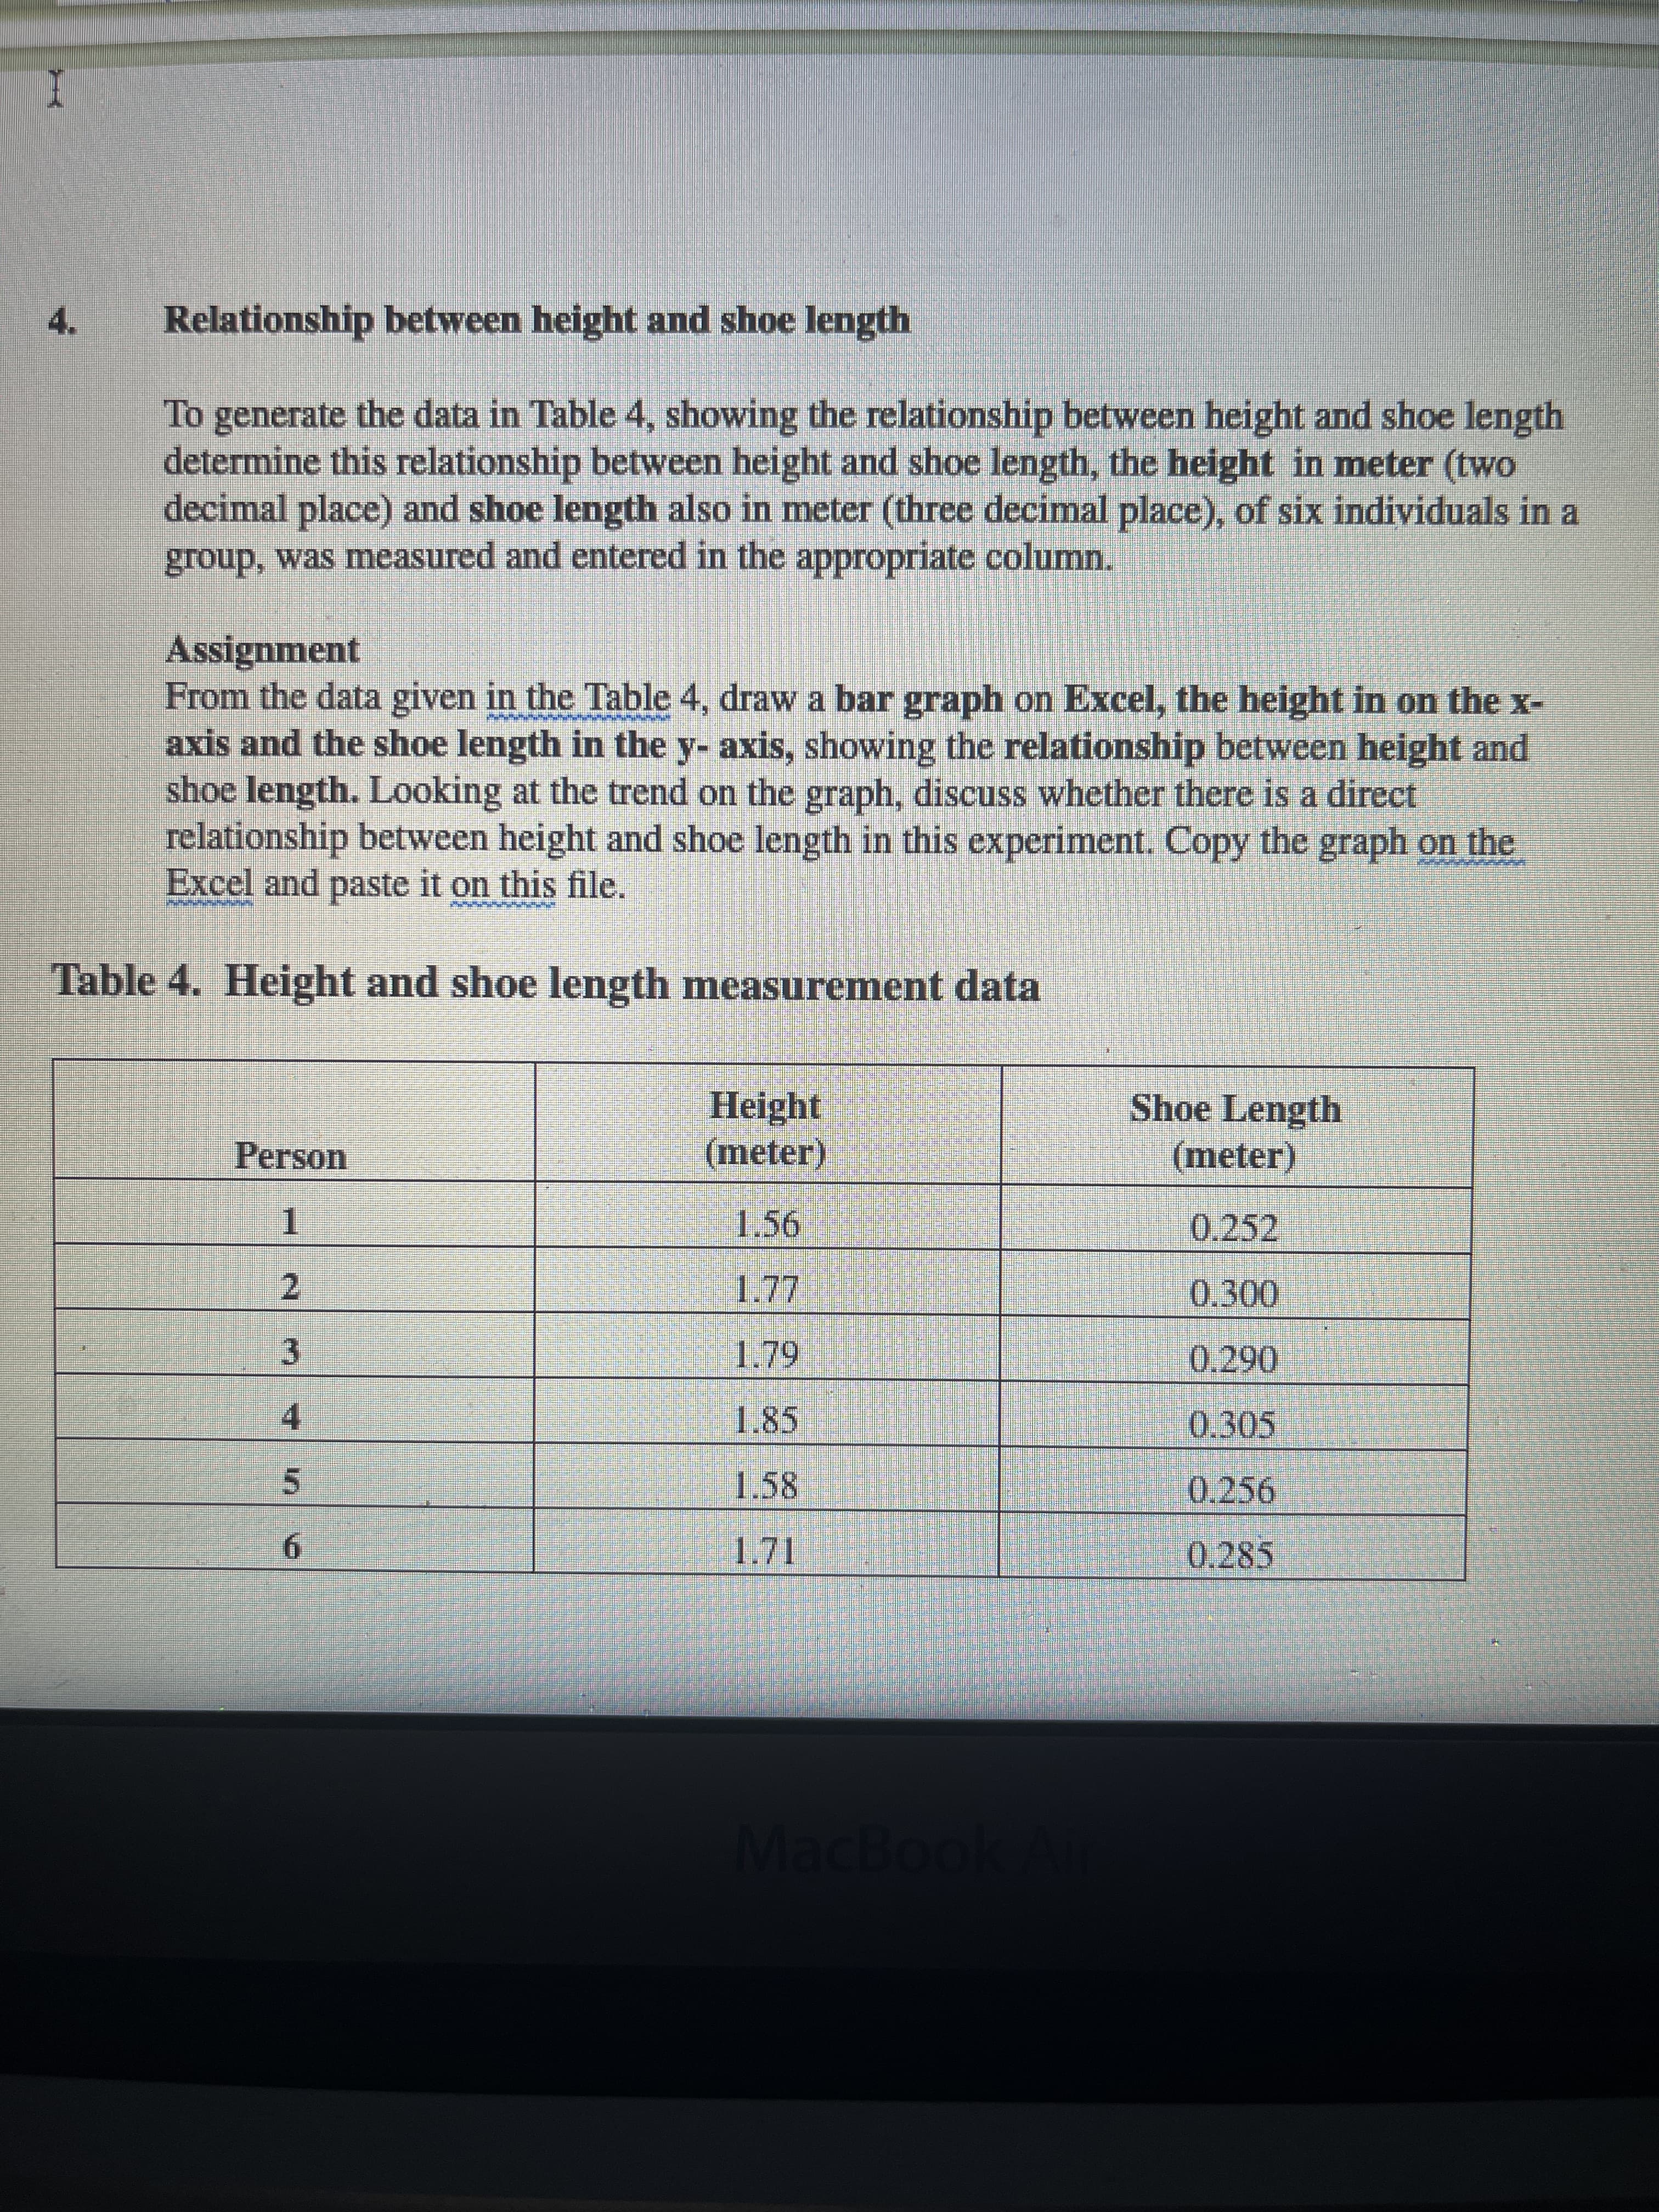 4.
Relationship between height and shoe length
To generate the data in Table 4, showing the relationship between height and shoe length
determine this relationship between height and shoe length, the height in meter (two
decimal place) and shoe length also in meter (three decimal place), of six individuals in a
group, was measured and entered in the appropriate column.
Assignment
From the data given in the Table 4, draw a bar graph on Excel, the height in on the x-
axis and the shoe length in the y- axis, showing the relationship between height and
shoe length. Looking at the trend on the graph, discuss whether there is a direct
relationship between height and shoe length in this experiment. Copy the graph on the
Excel and paste it on this file.
Table 4. Height and shoe length measurement data
Height
(meter)
Shoe Length
(meter)
Person
0.252
1.
0.300
2.
3.
4.
1.85
0.305
1.58
0.256
5.
0.285
9.
MacBoo
